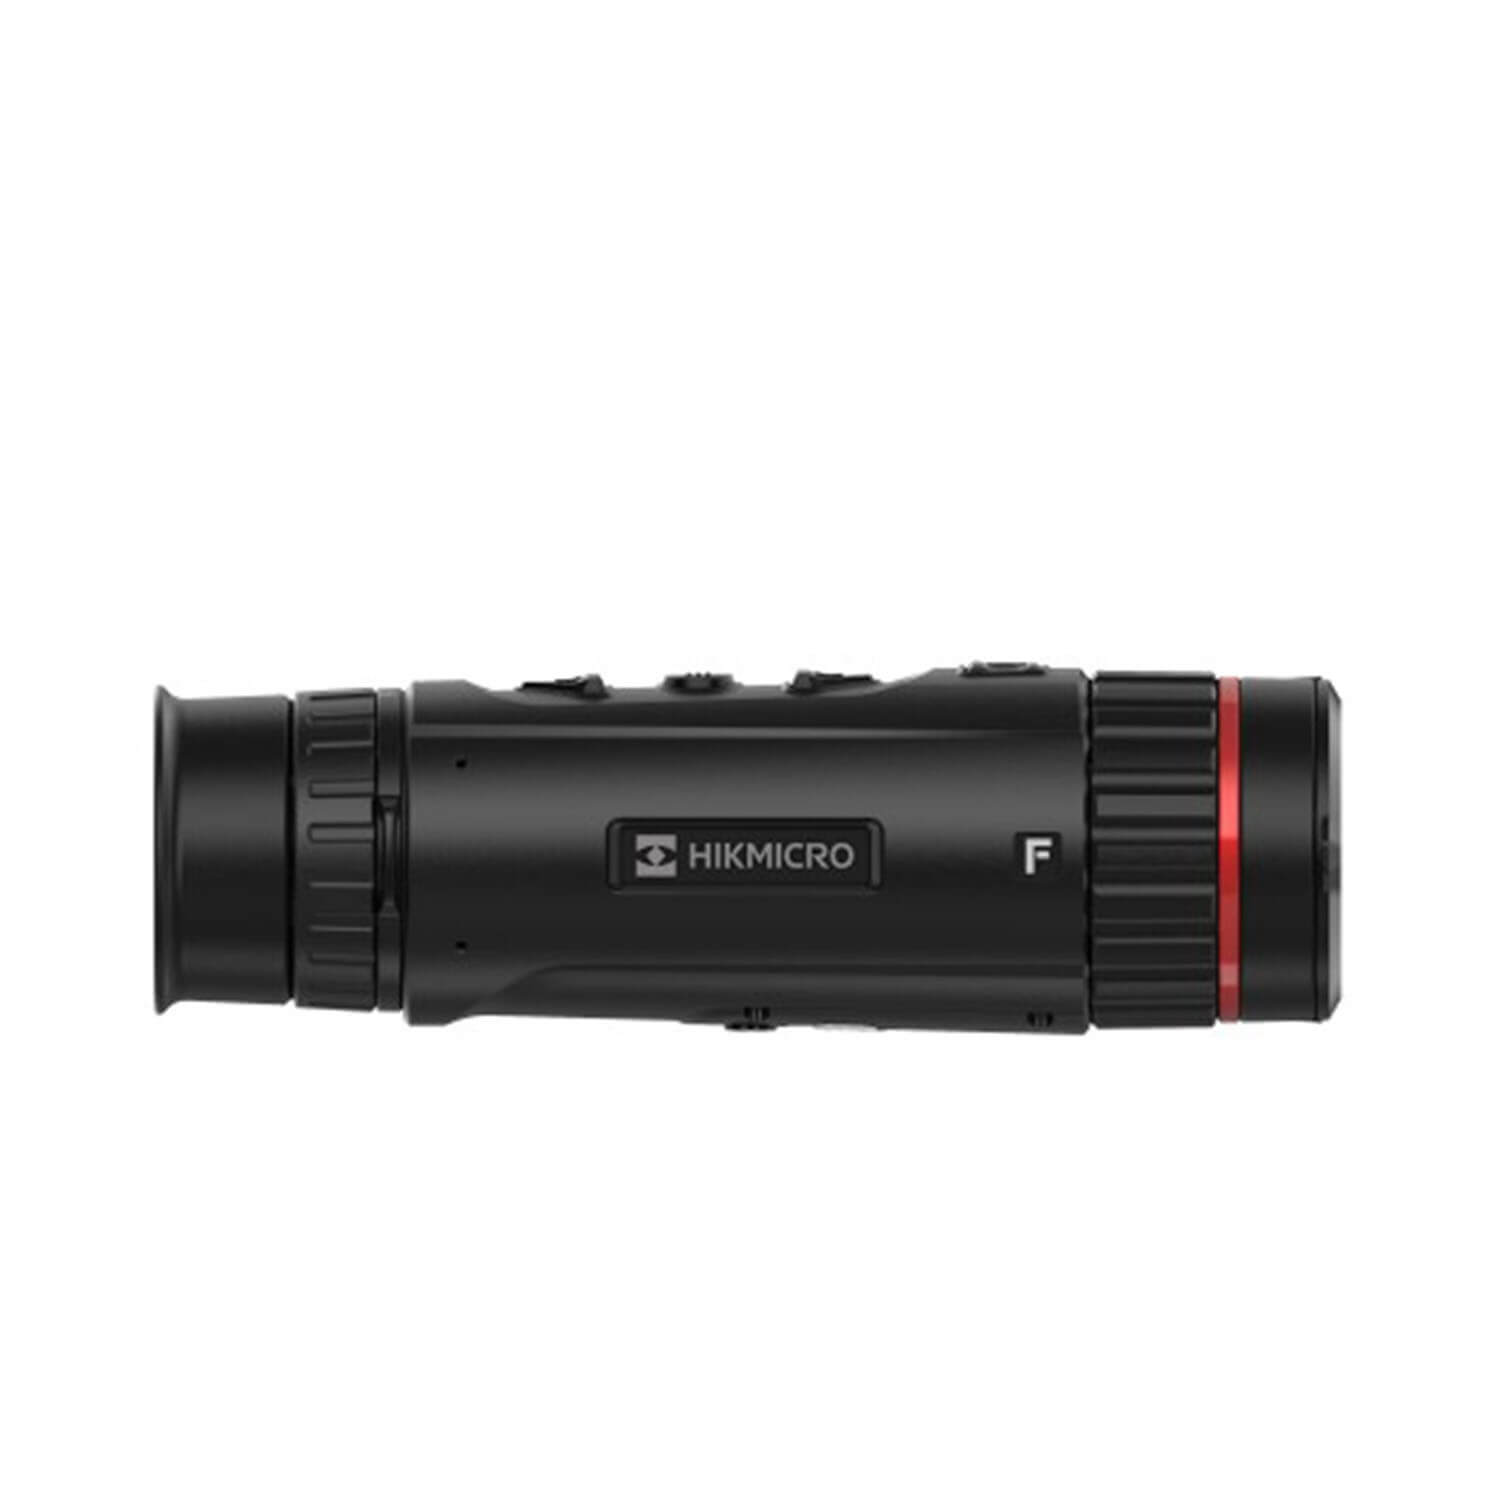 Hikmicro thermal imaging scope Falcon FH25